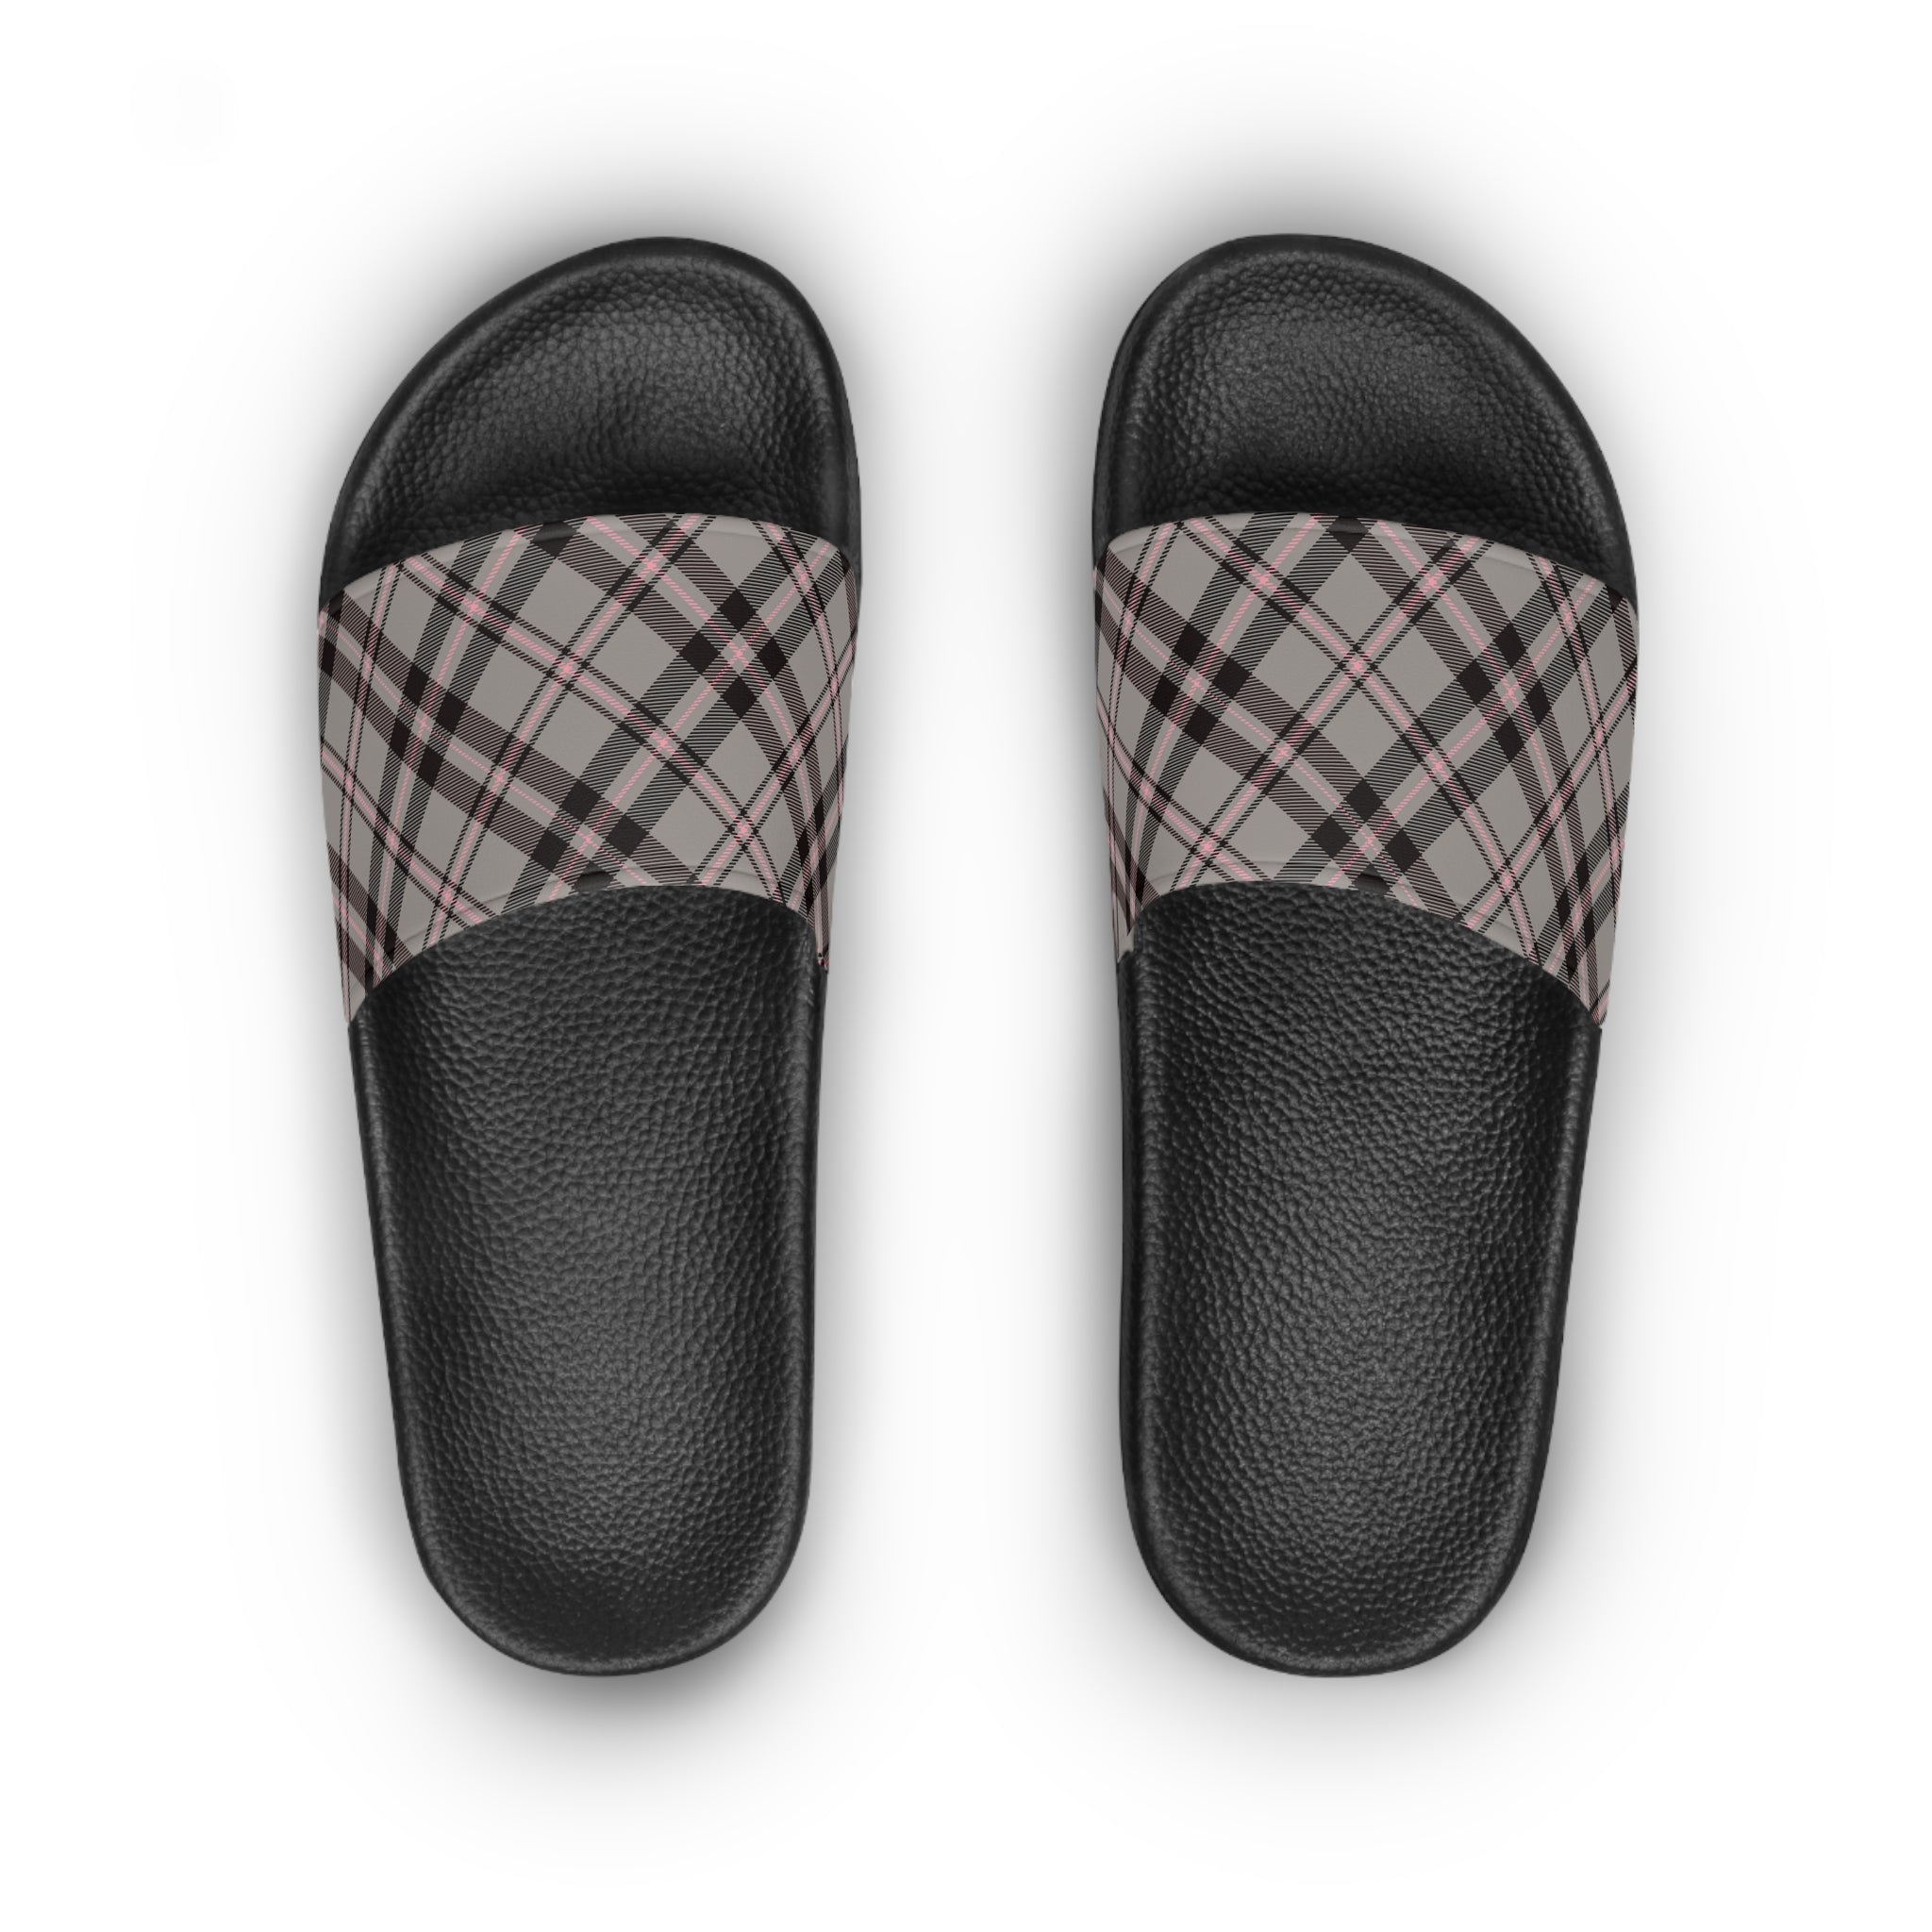  Abby Pattern in Gray and Pink Women's Slide Sandals, Slide Sandals for Women, Plaid Slip Ons ShoesBlacksoleUS12